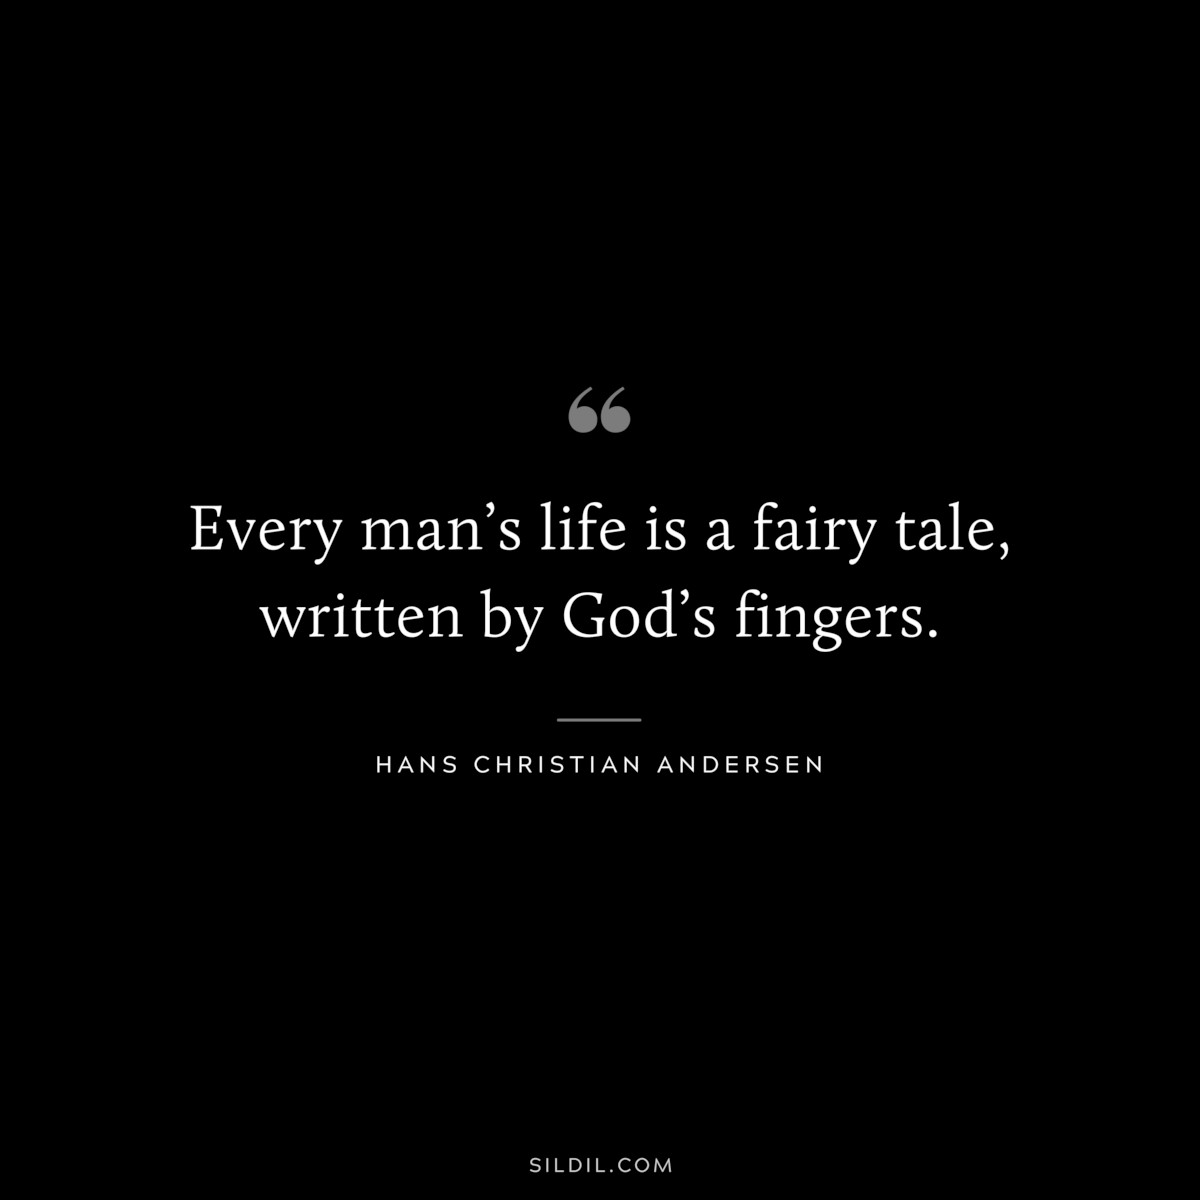 Every man’s life is a fairy tale, written by God’s fingers. ― Hans Christian Andersen